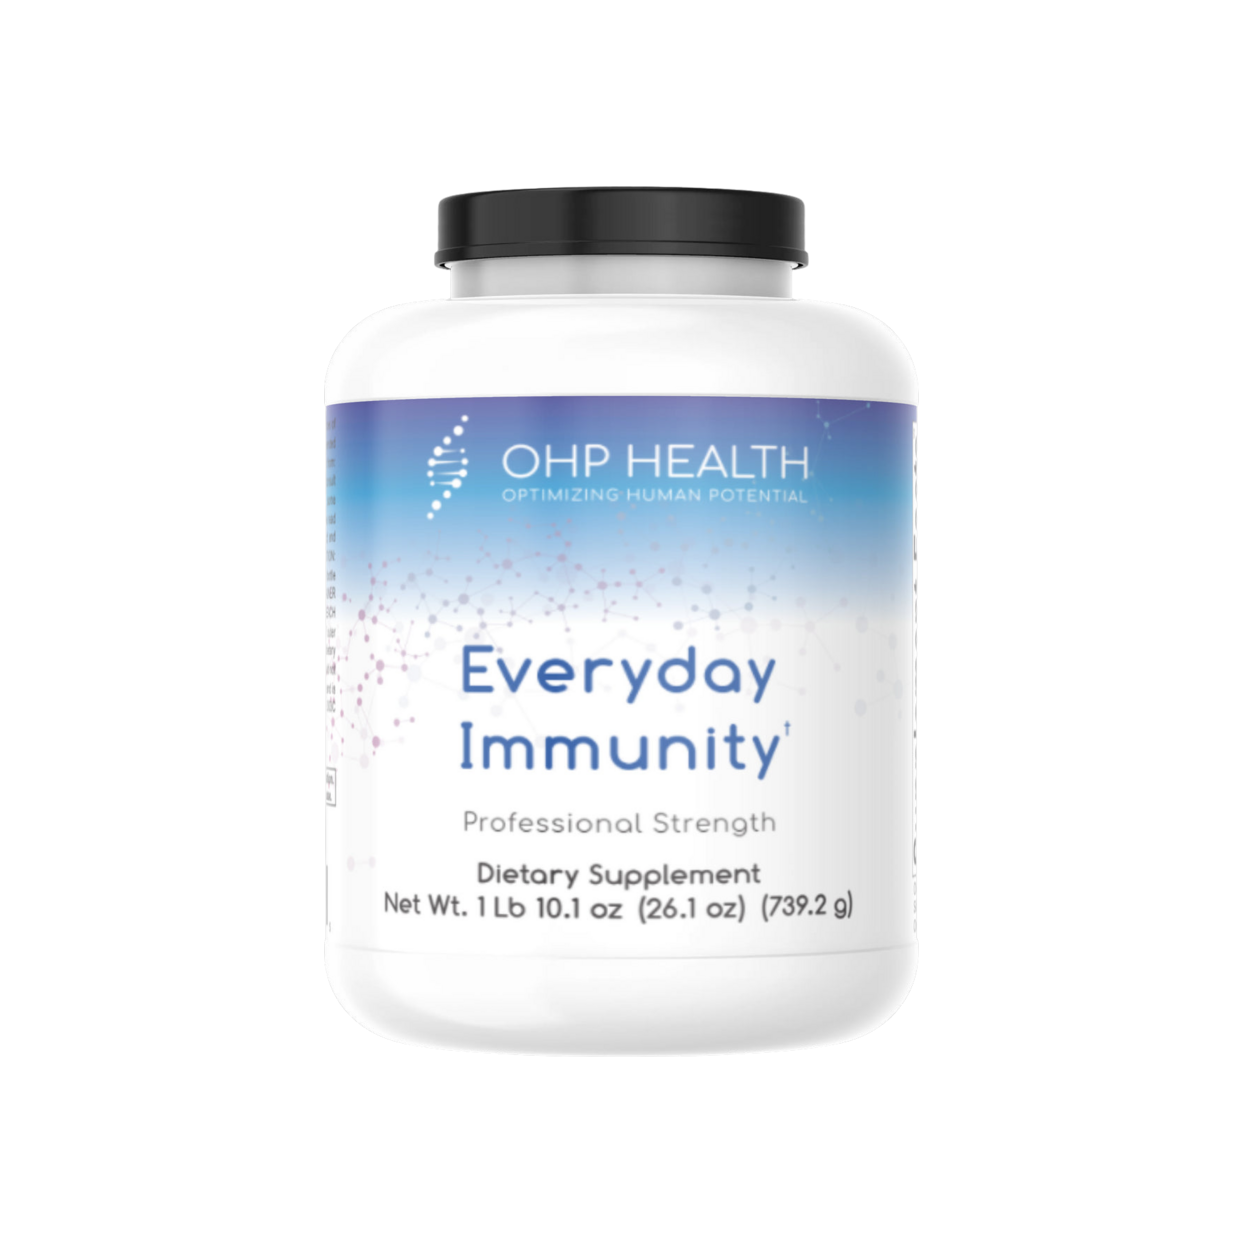 OHP Health Everyday Immunity is a specially formulated supplement designed to support the body's immune system and overall health. This powerful formula contains essential nutrients that promote cell replication, increase antioxidant protection, and maintain a healthy.